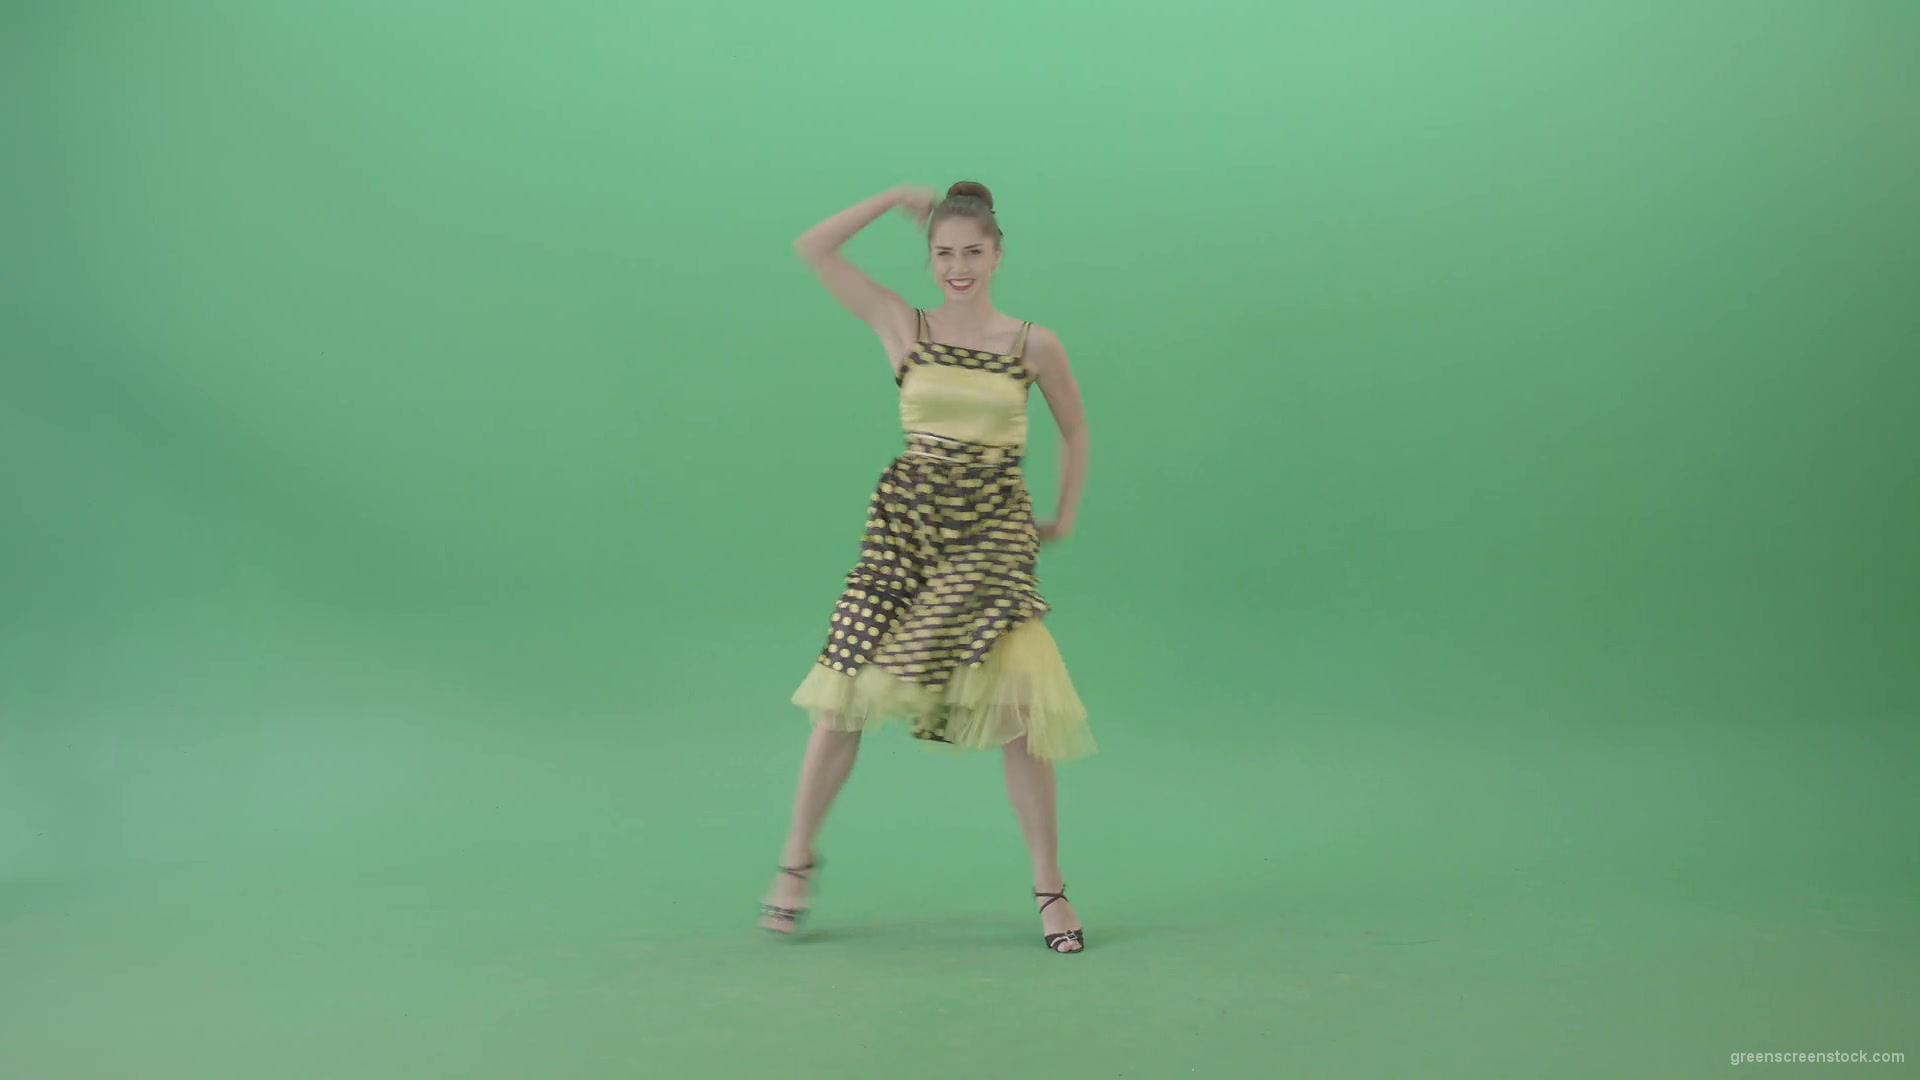 Happy-Woman-dancing-Rock-and-Roll-Jazz-Swing-Boogie-woogie-isolated-on-Green-Screen-4K-Video-Footage-1920_008 Green Screen Stock